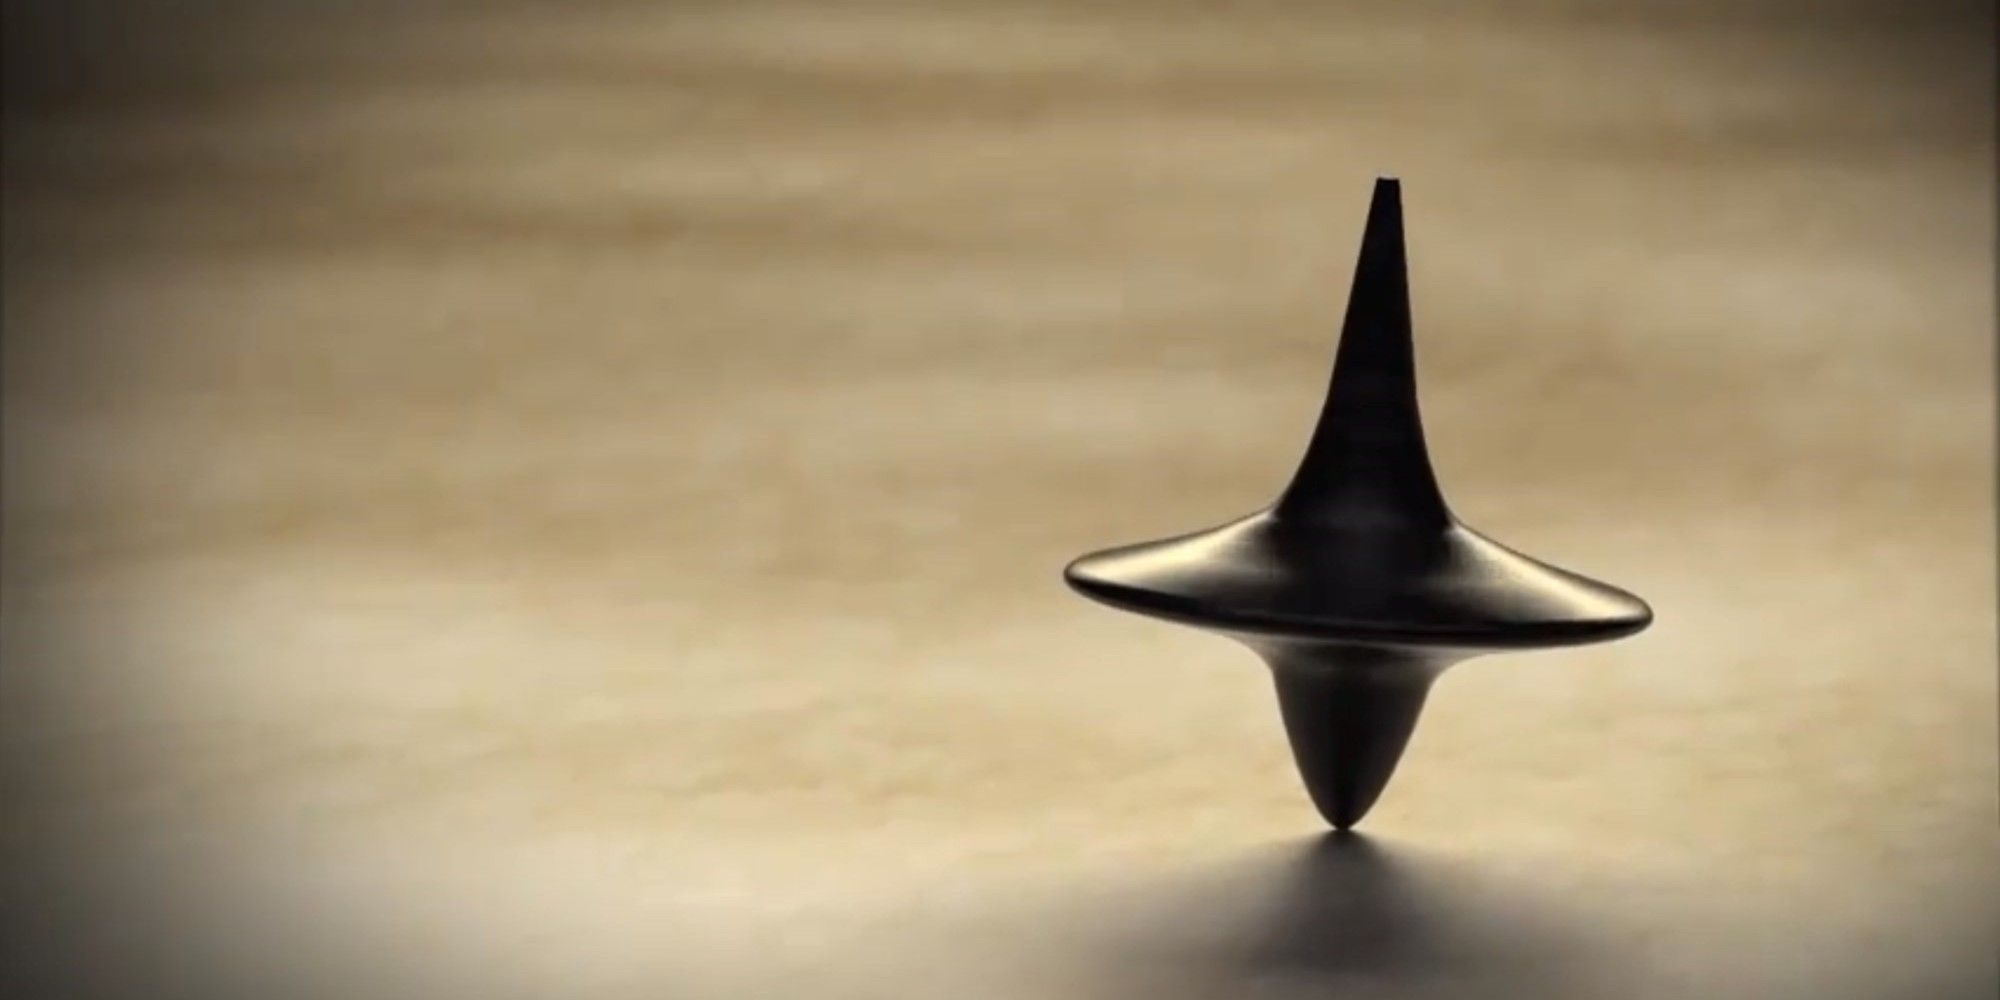 Inception 2010 film, directed by Christopher Nolan, image featuring spinning top totem